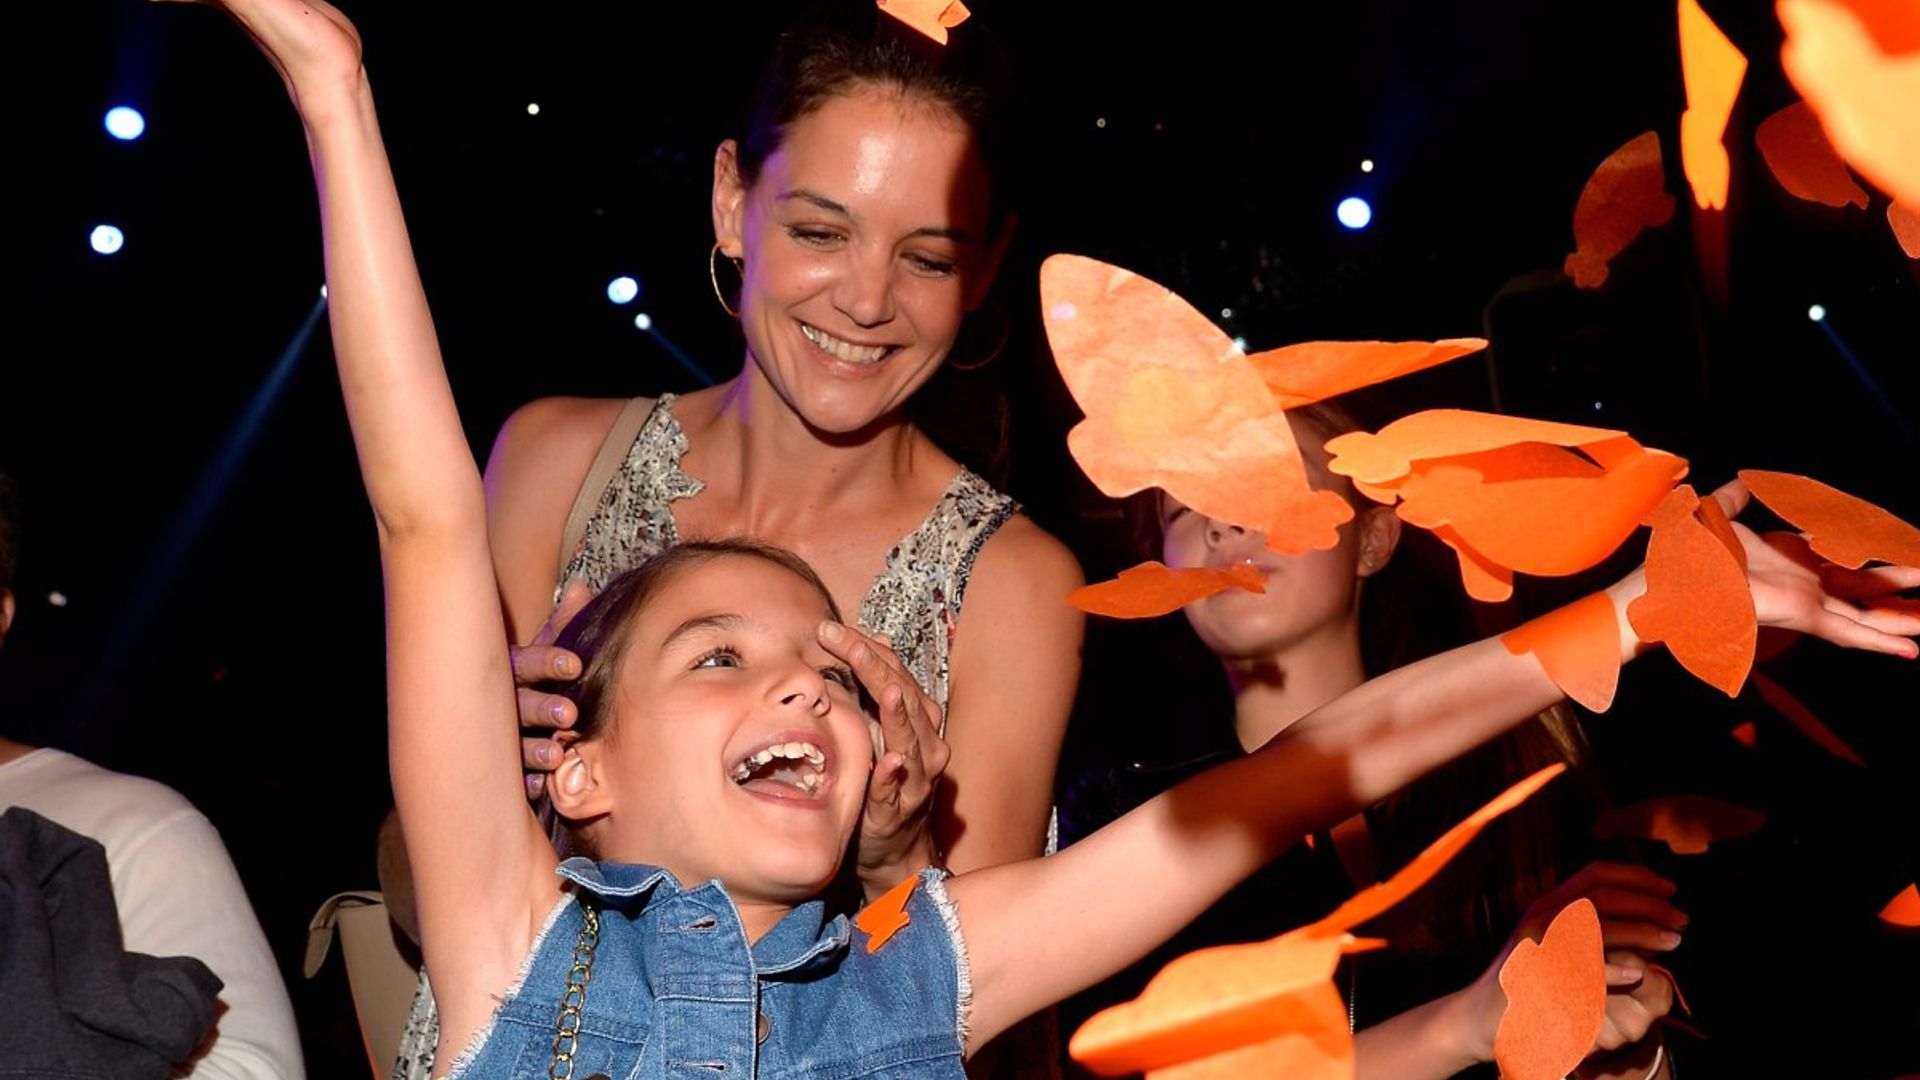 Katie Holmes Daughter Suri Cruise Steps Into The Spotlight As She Follows In Famous Moms 